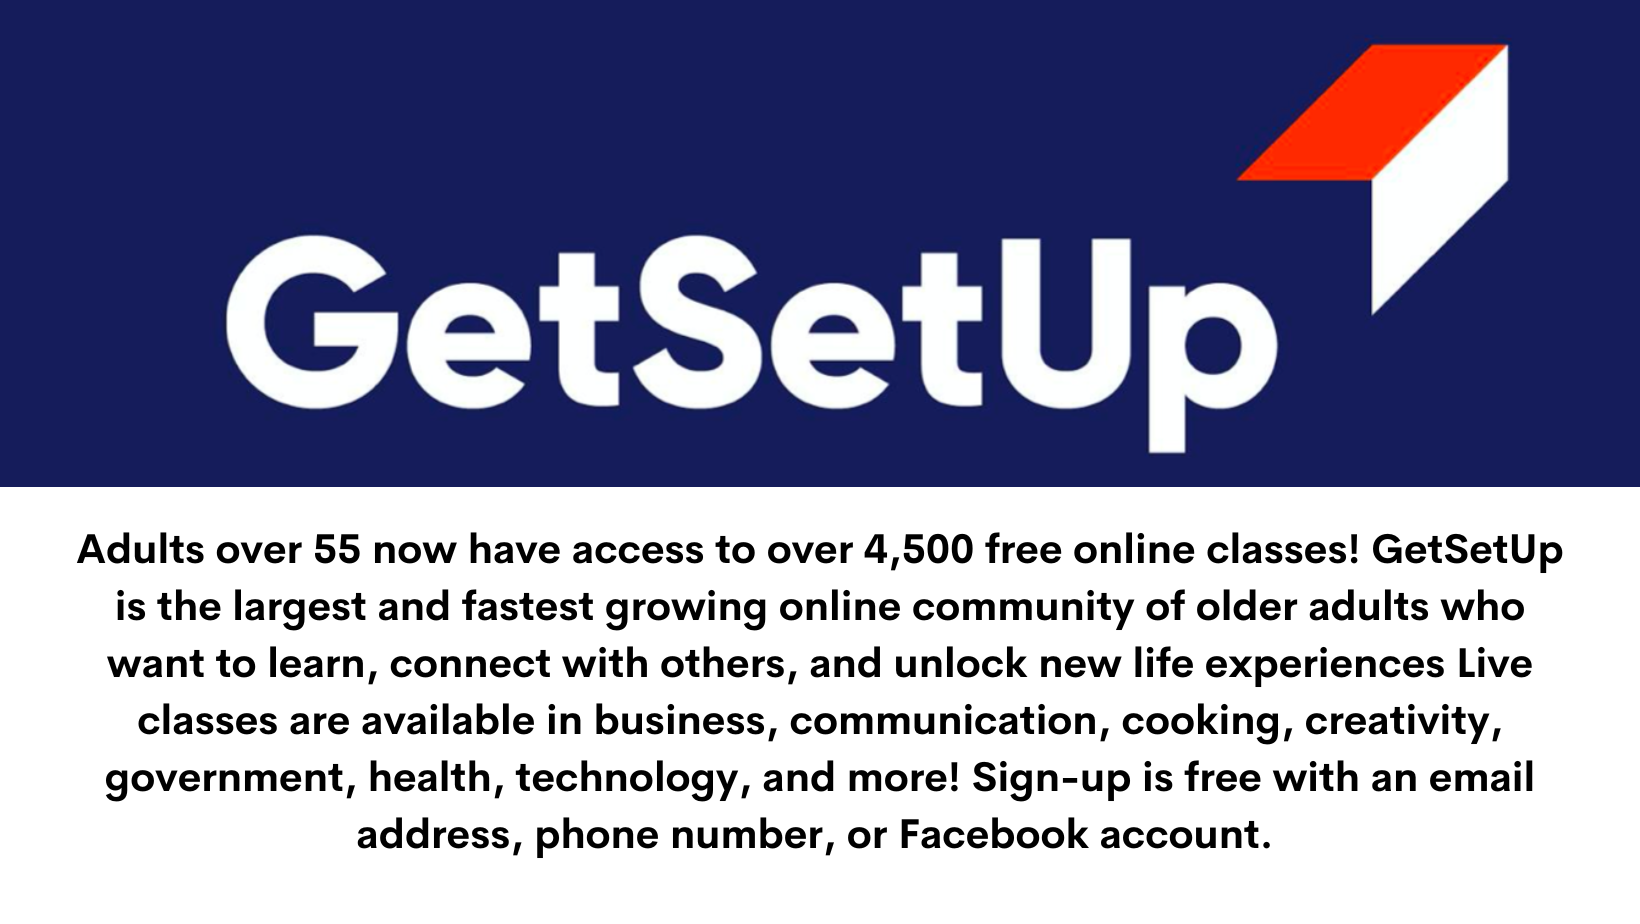 Adults over 55 now have access to over 4,500 free online classes! GetSetUp is the largest and fastest growing online community of older adults who want to learn, connect with others, and unlock new life experiences L.png